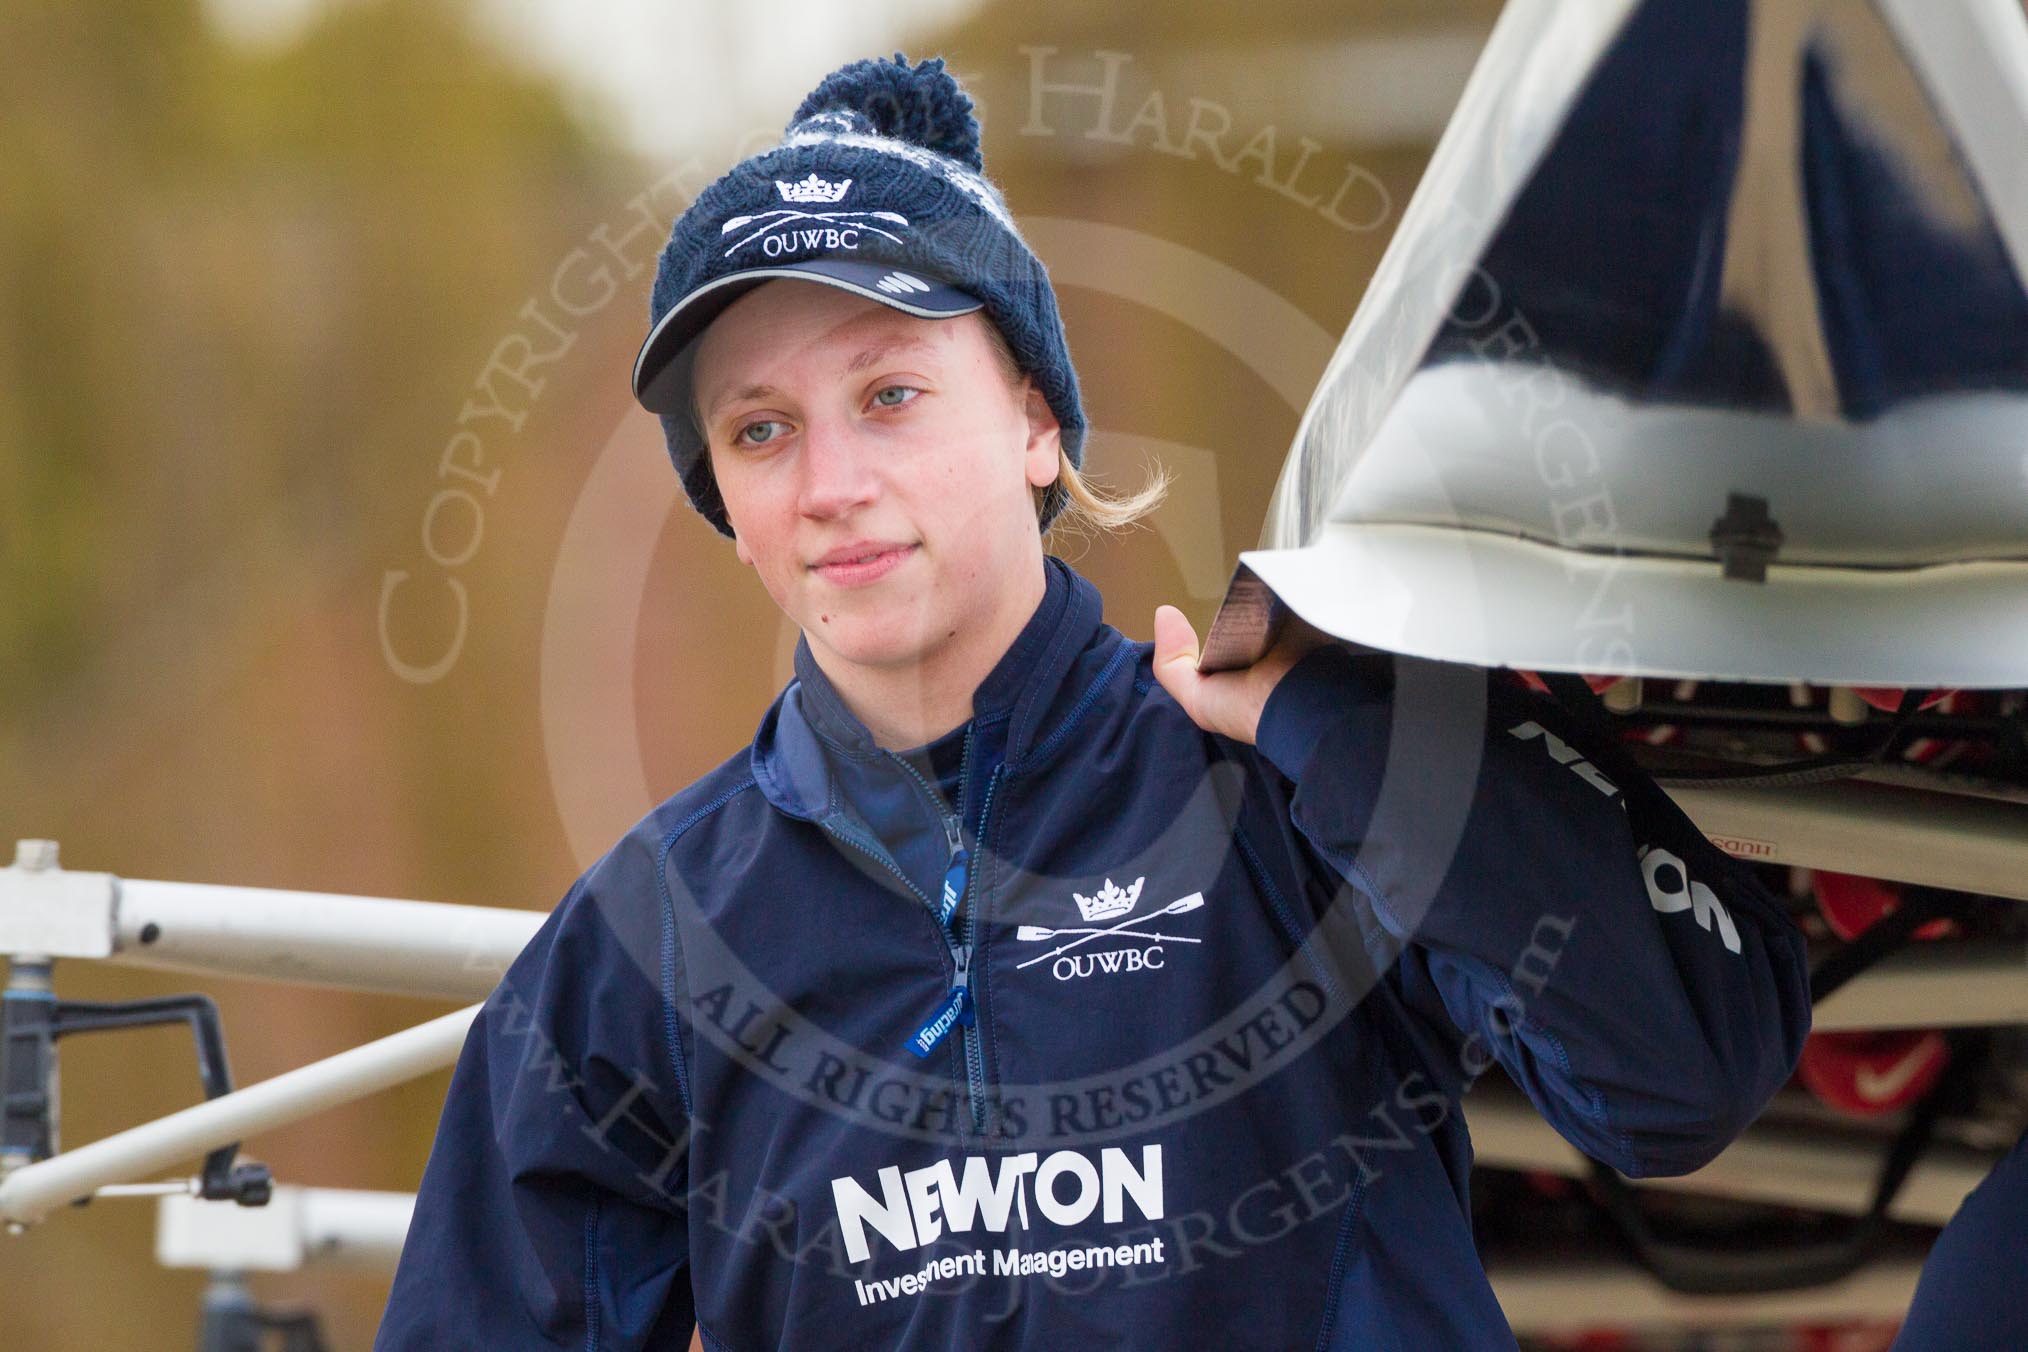 The Boat Race season 2016 - OUWBC training Wallingford: Georgie Daniell, bow in Osiris, the OUWBC reserve boat.
River Thames,
Wallingford,
Oxfordshire,

on 29 February 2016 at 15:15, image #26